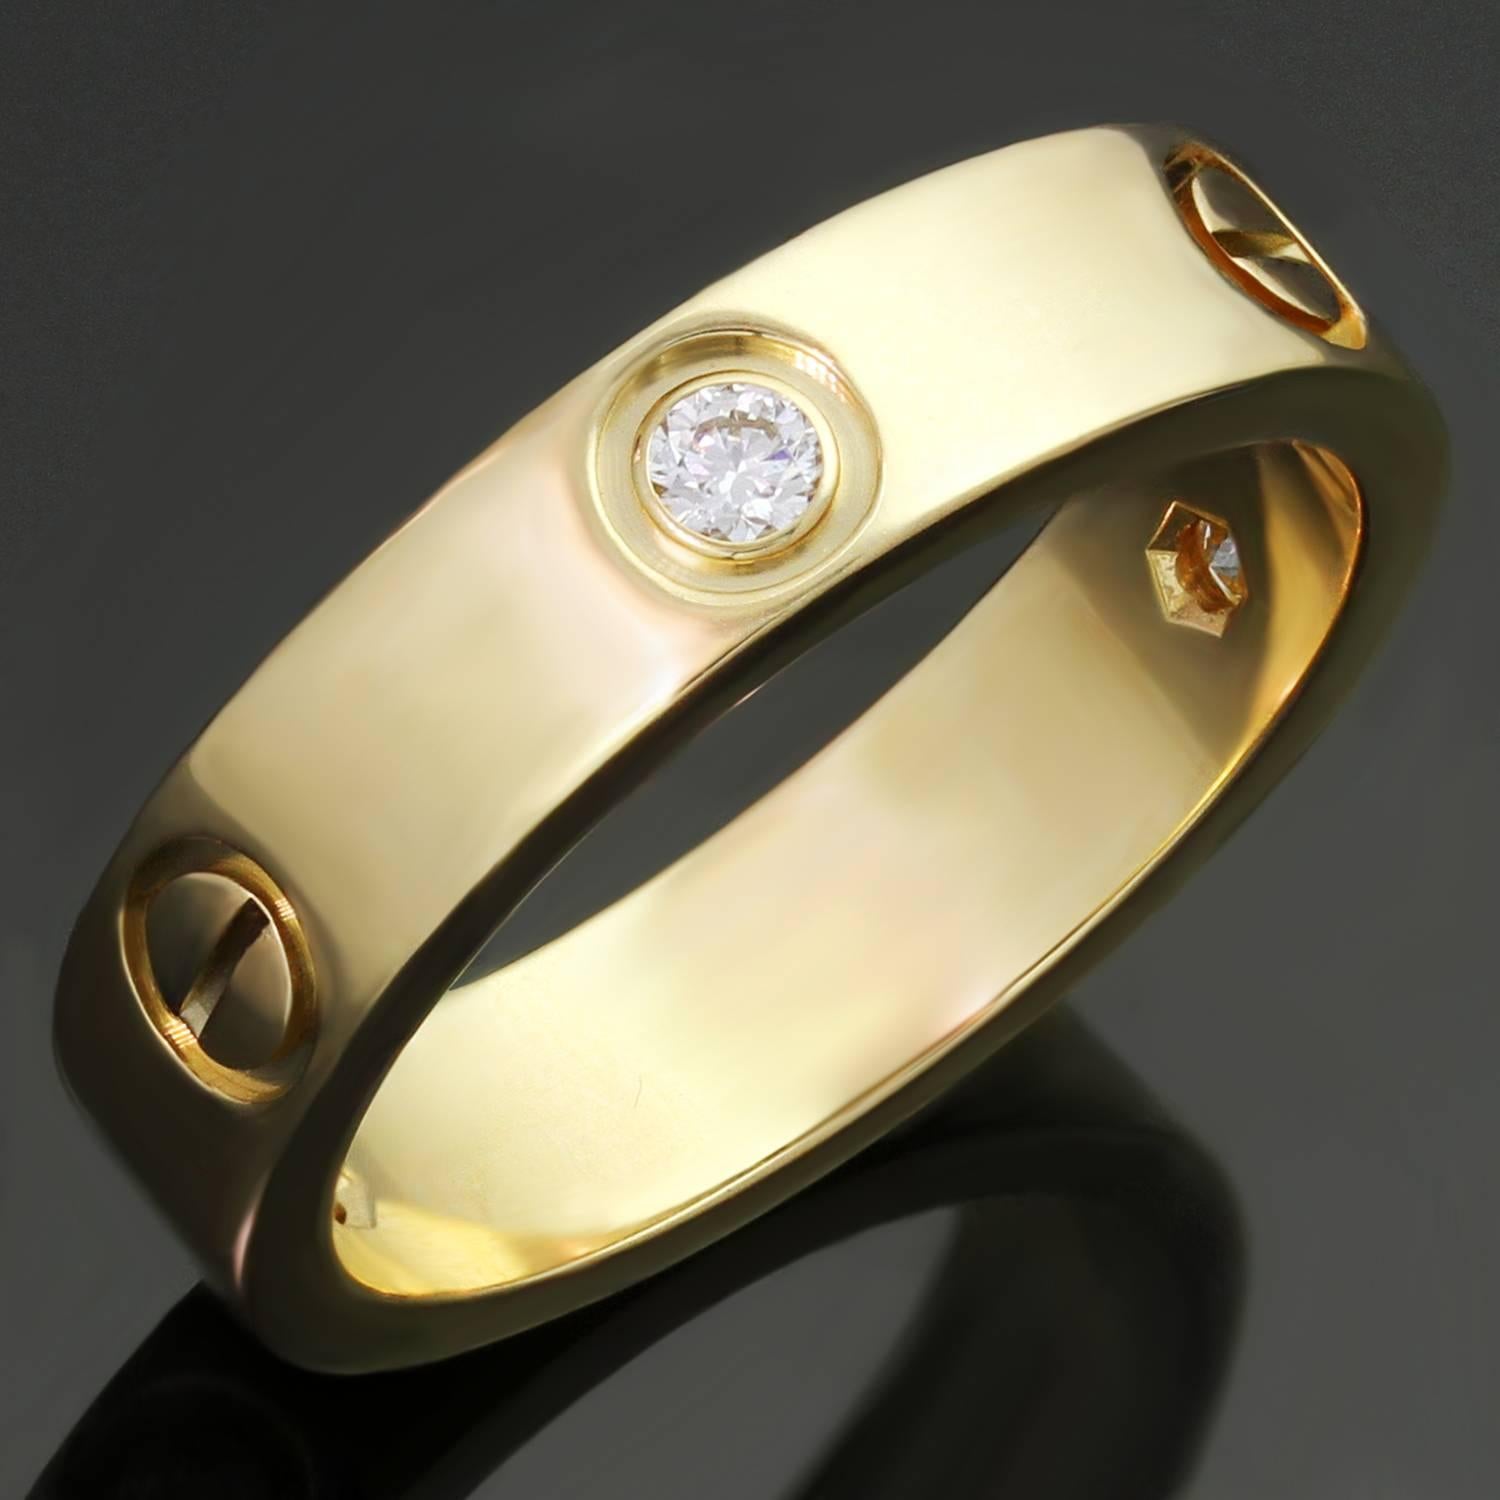 This fabulous ring from the iconic Love collection is crafted in 18k yellow gold and bezel-set with 3 brilliant-cut round diamonds of an estimated 0.22 carats. Made in France circa 2014. Measurements: 0.19